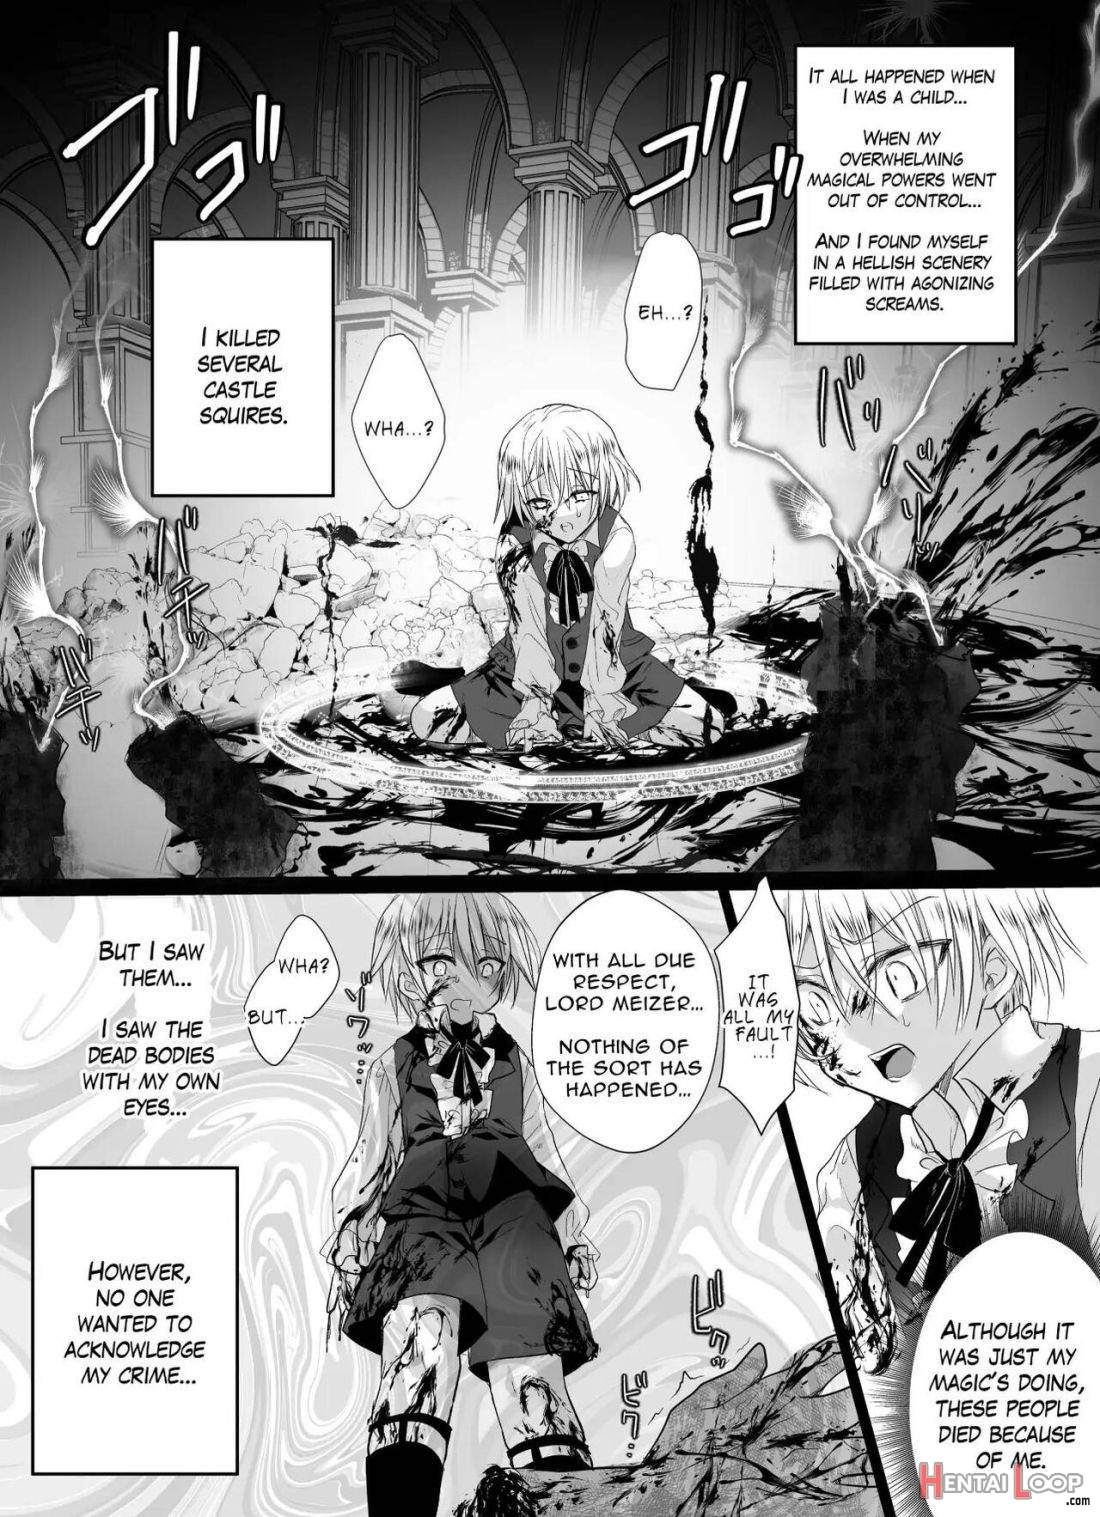  JK’s Tragic Isekai Reincarnation as the Villainess ~But My Precious Side Character!~ page 19